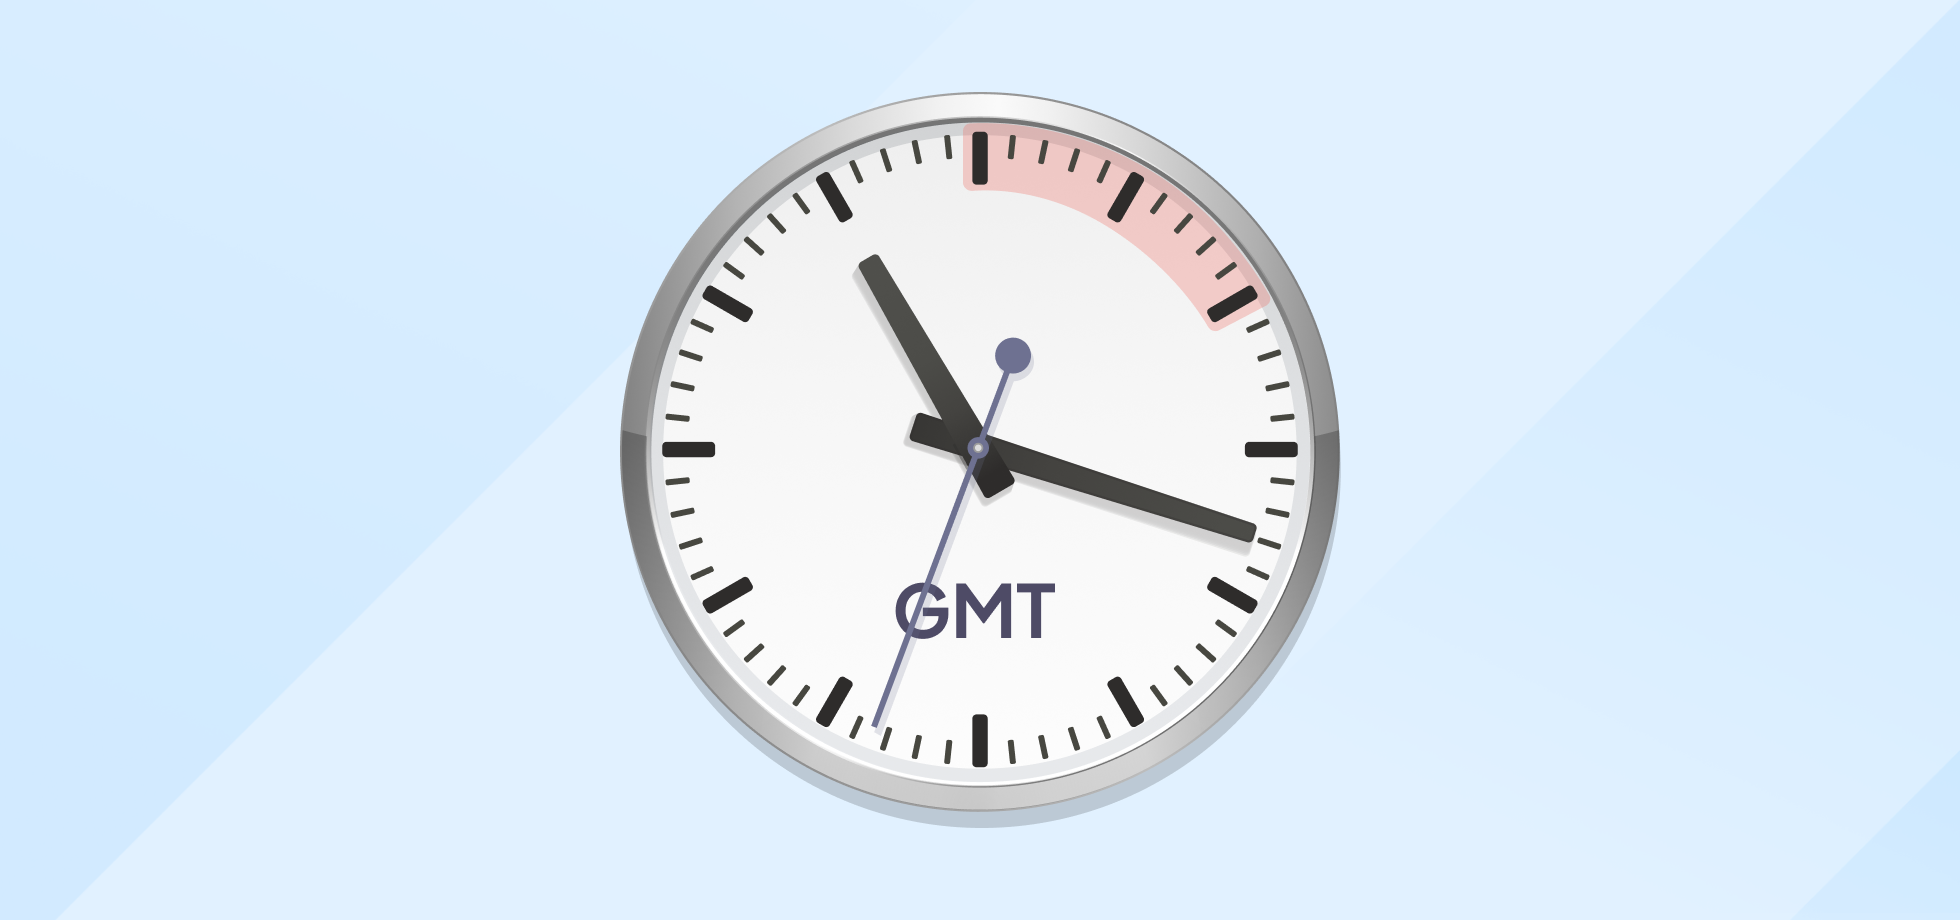 Image of a clock in the GMT time zone